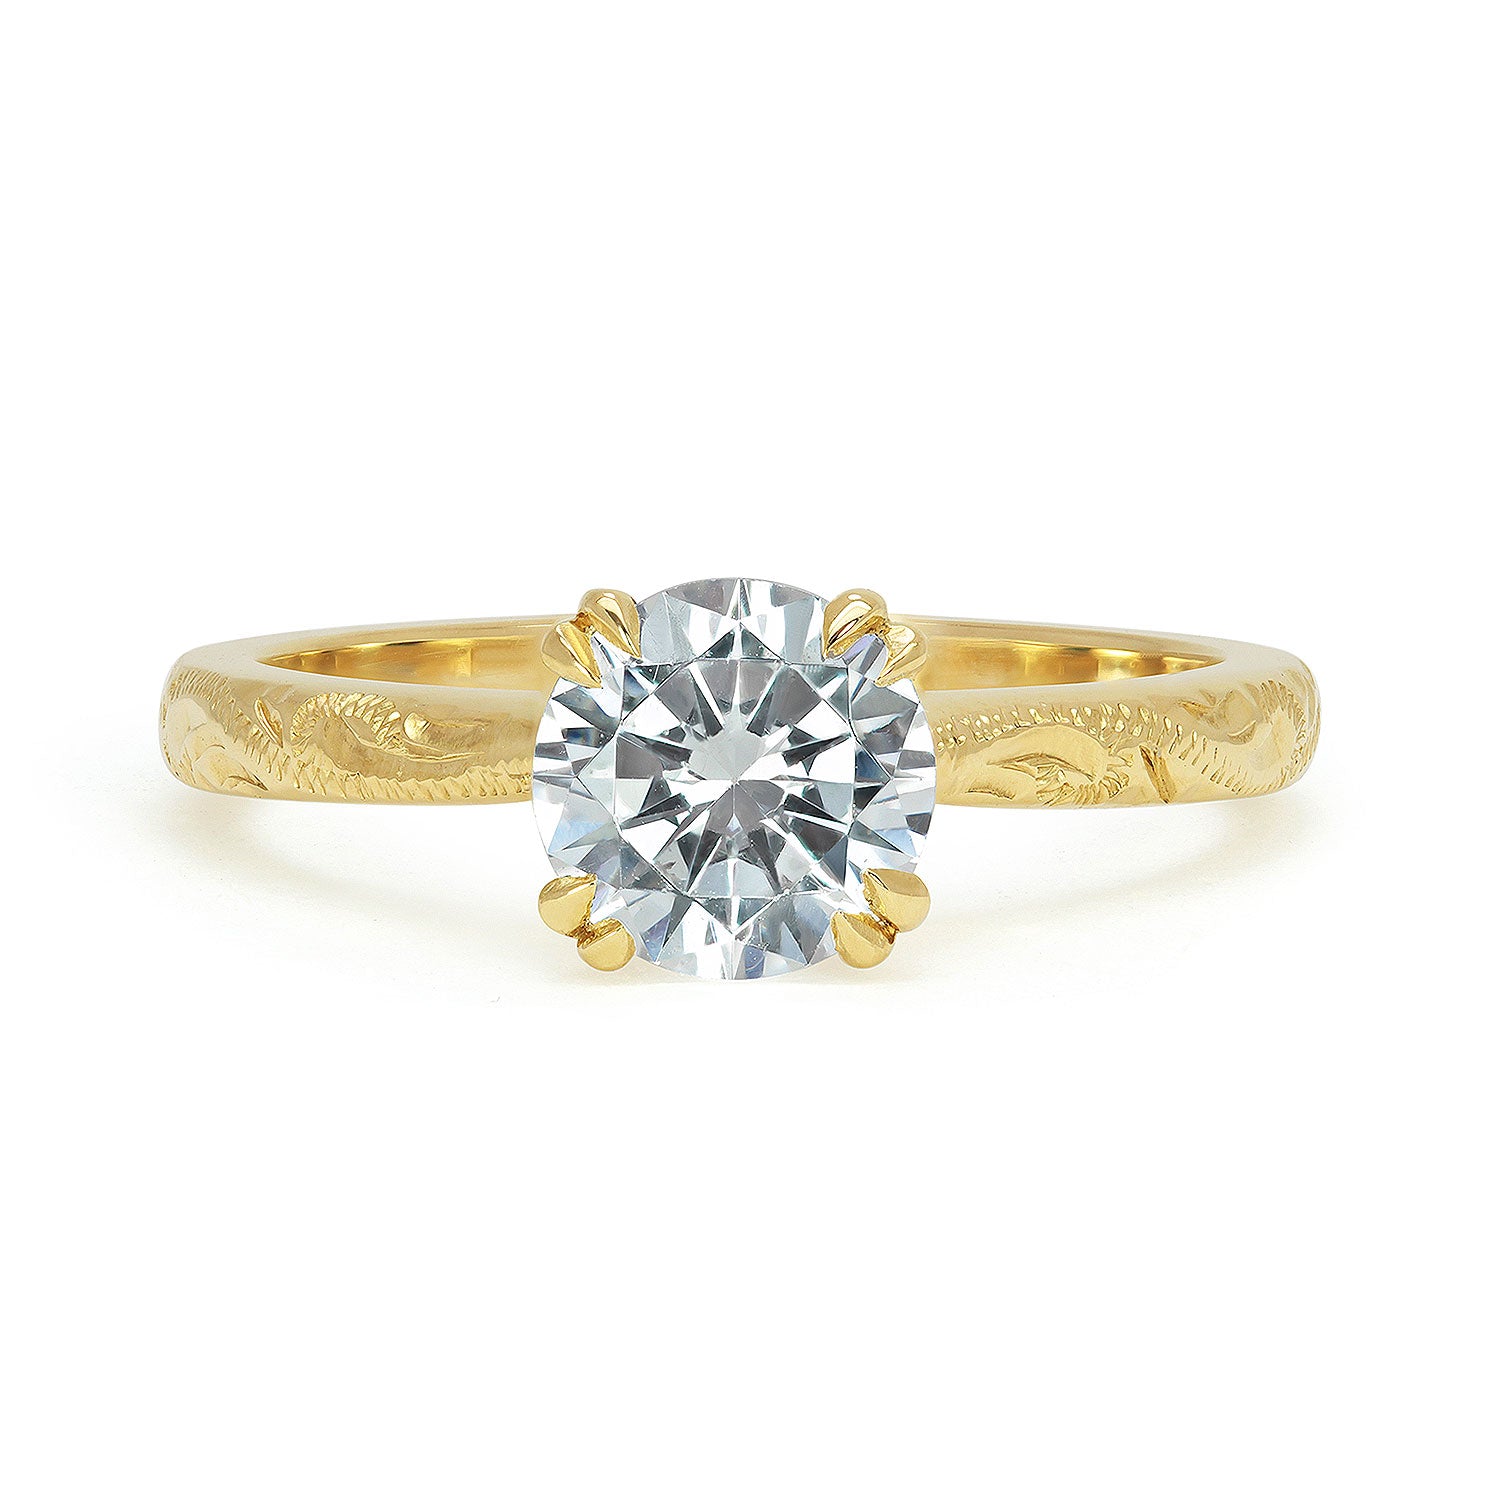 Lebrusan Studio Artisan Ethical Diamond Solitaire Engagement Ring, 1ct brilliant-cut Ocean Diamond, 18ct yellow Fairmined Ecological Gold and hand-engraving